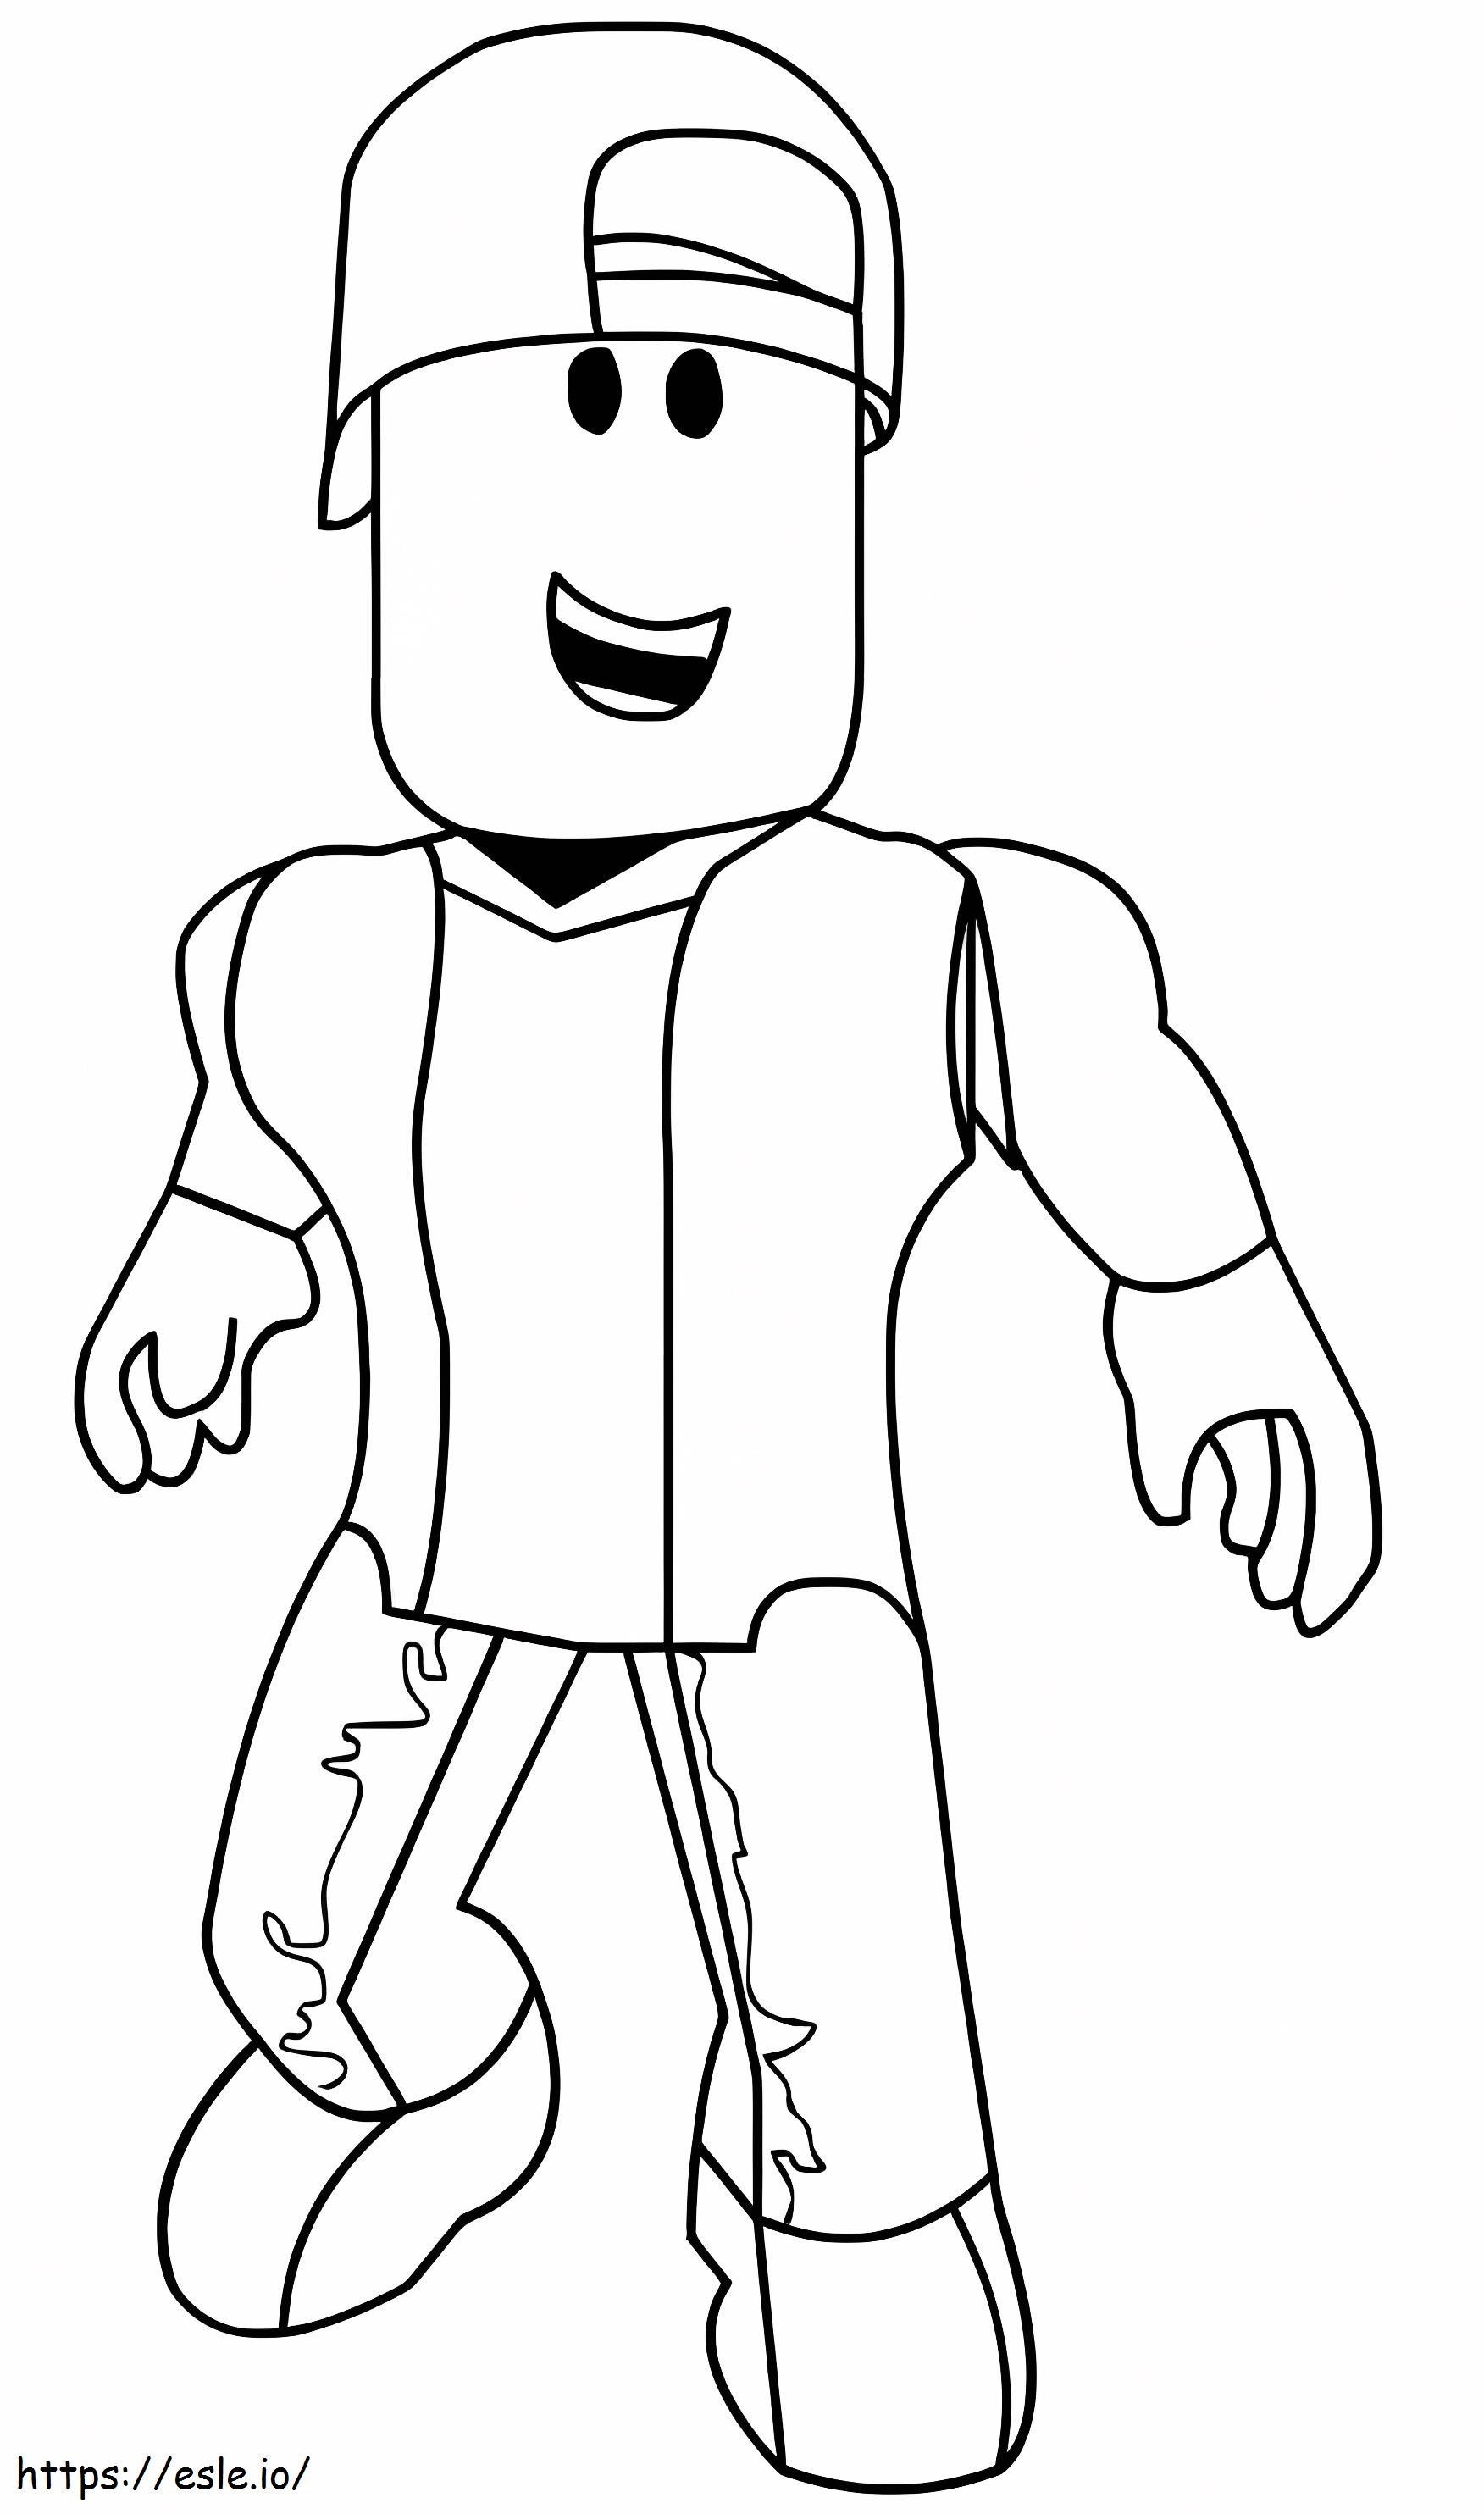 Regular character roblox coloring page